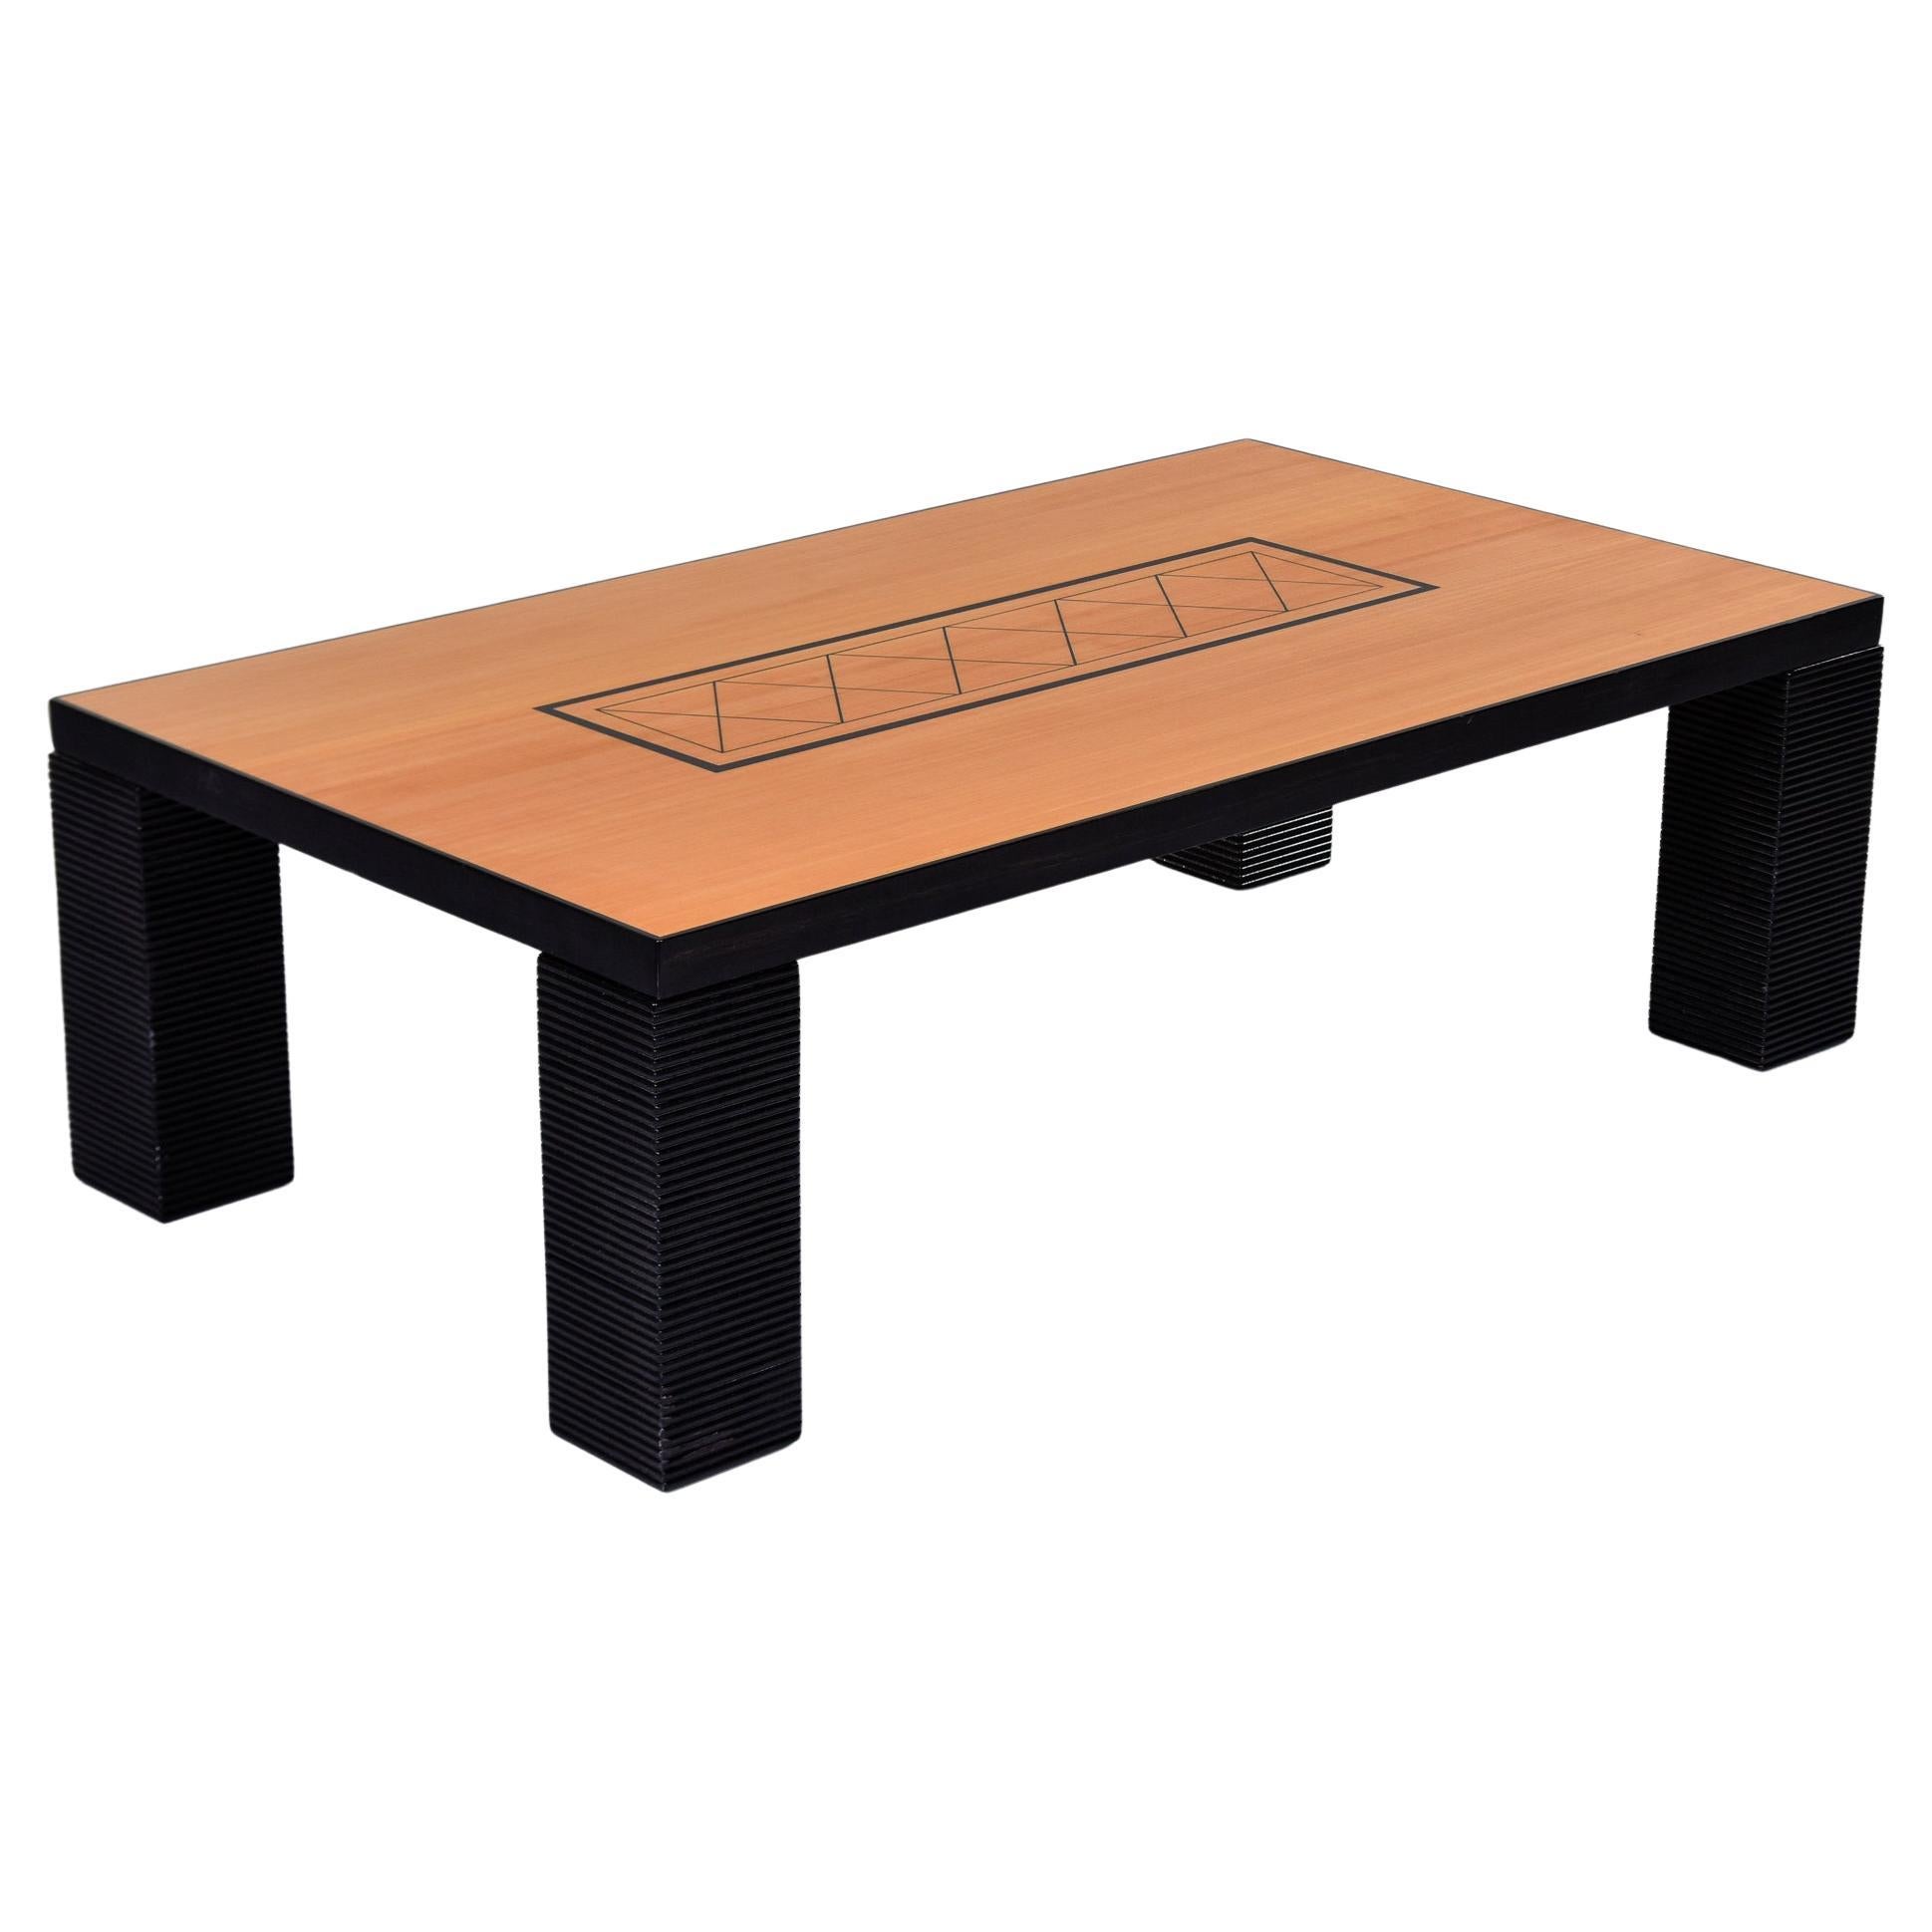 Oversized Italian Art Deco Birch and Black Coffee Table For Sale